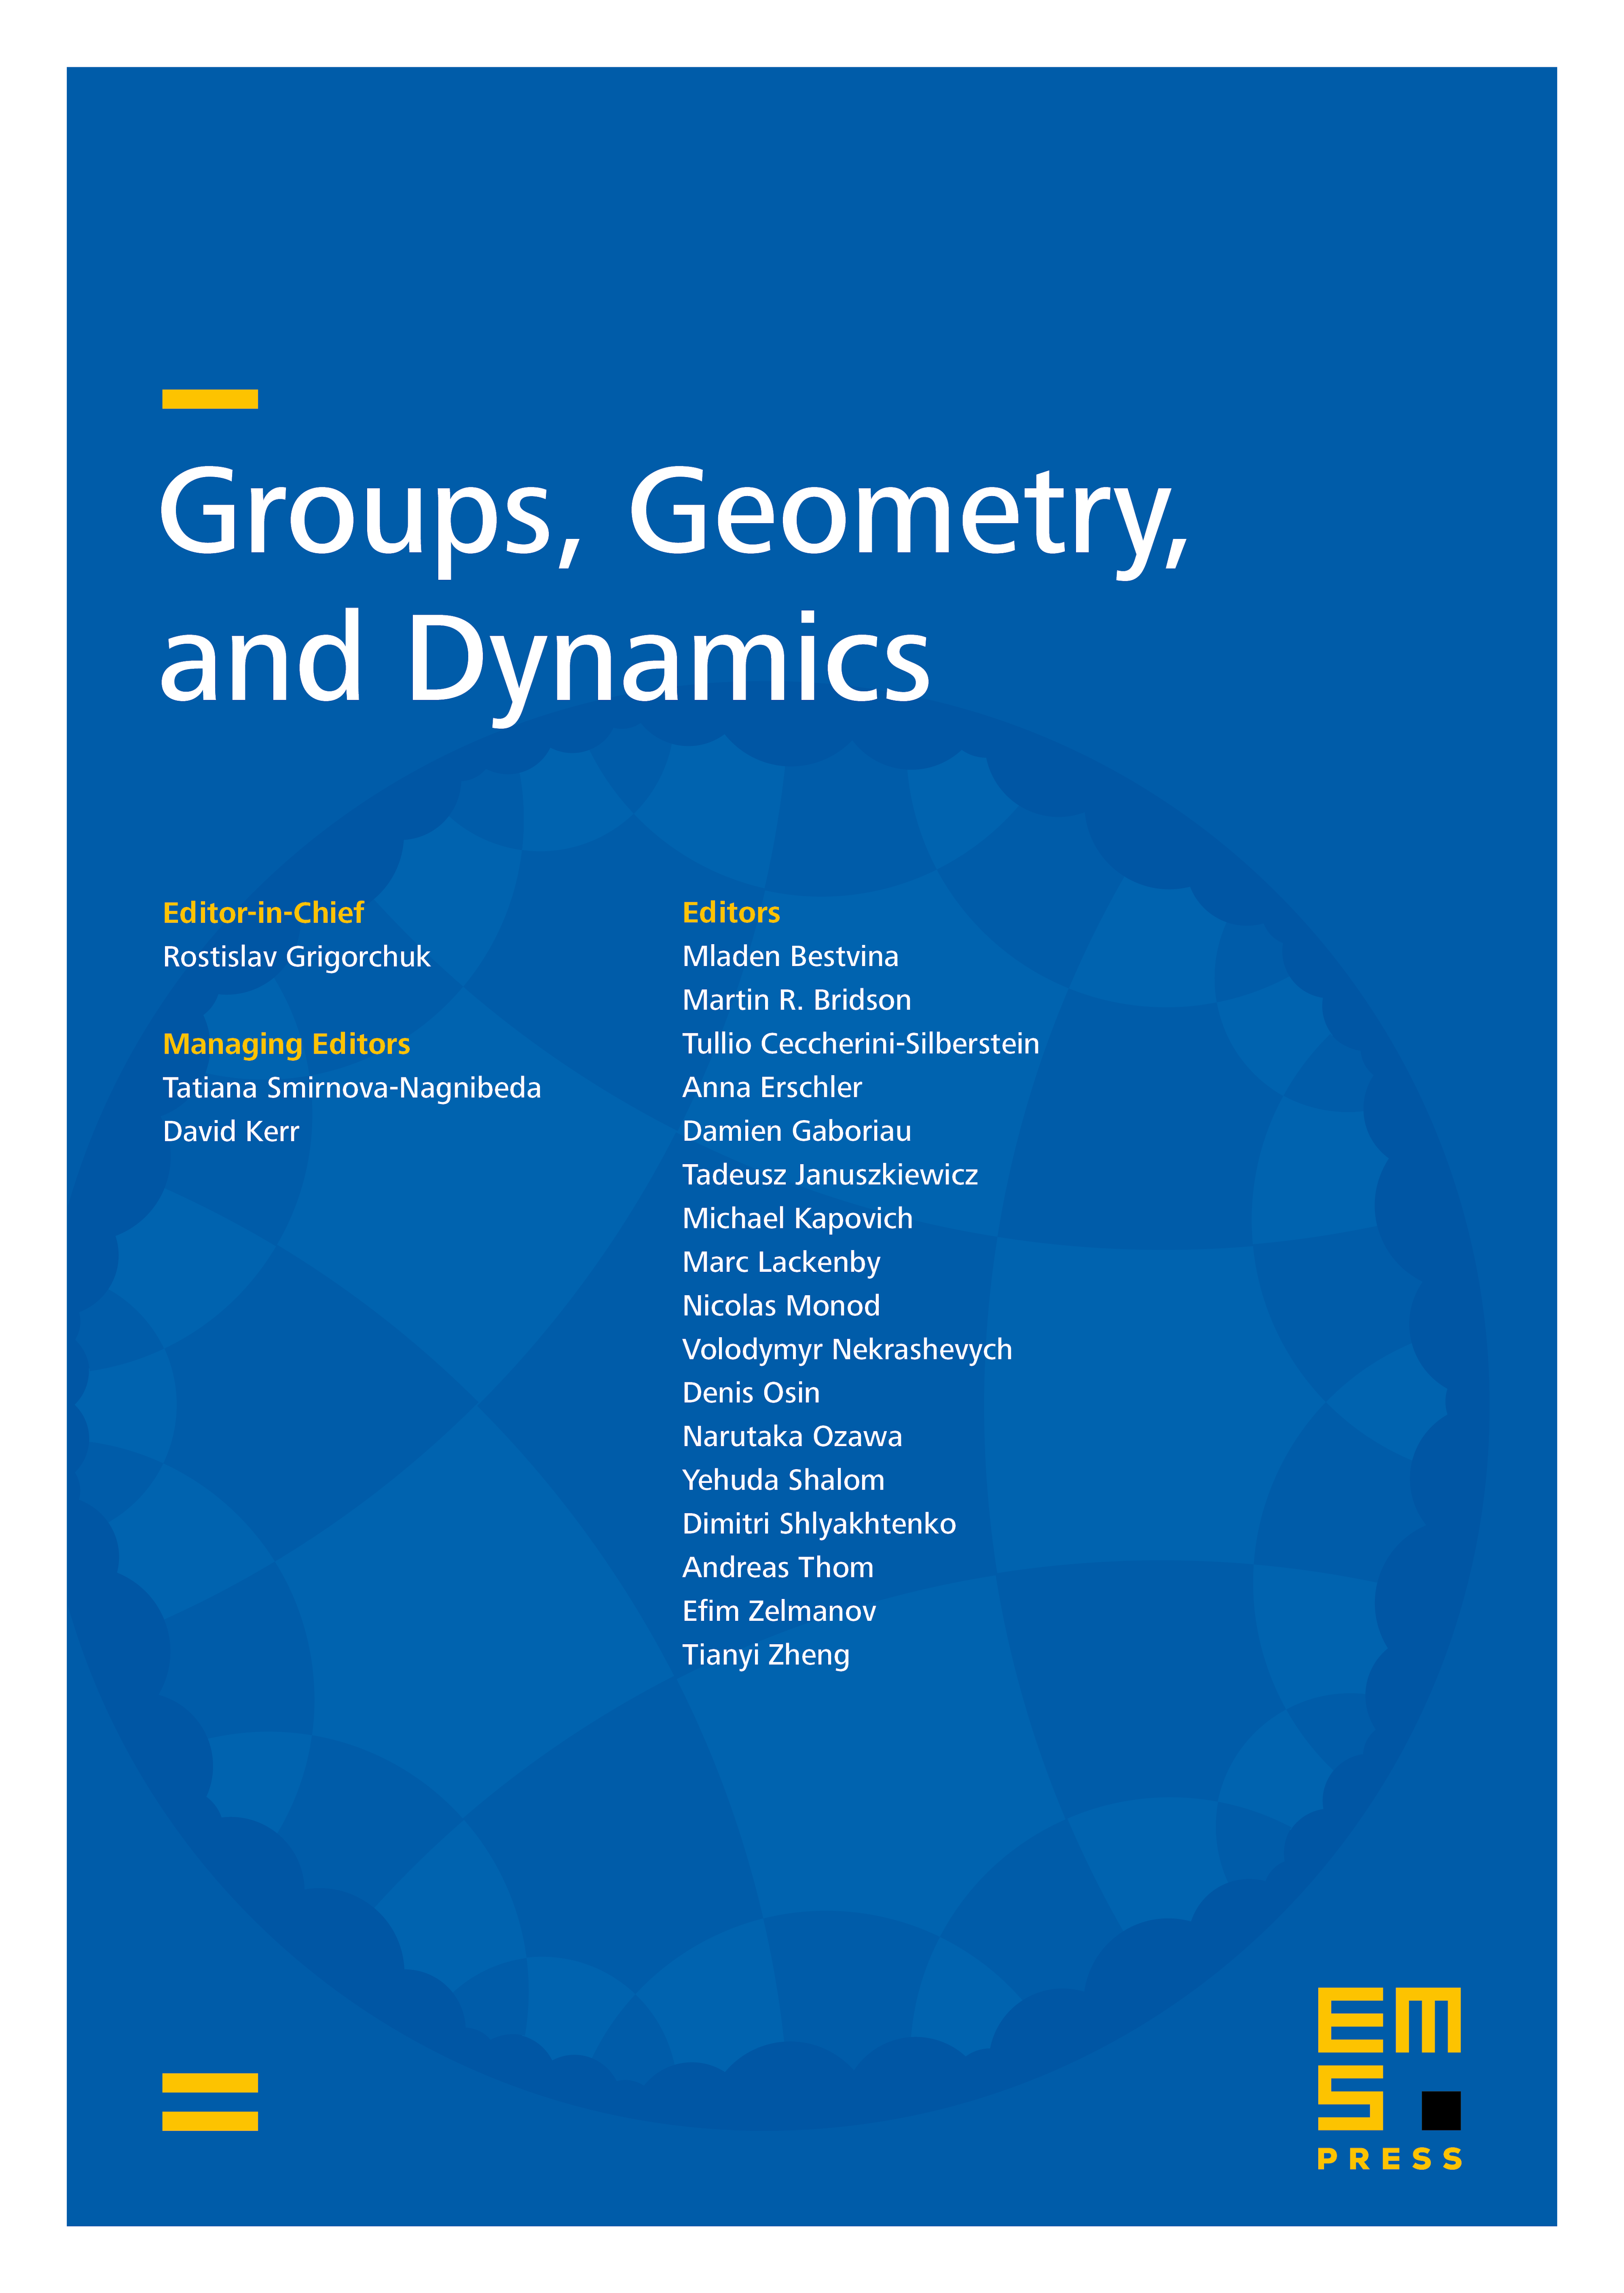 Extremely primitive groups cover